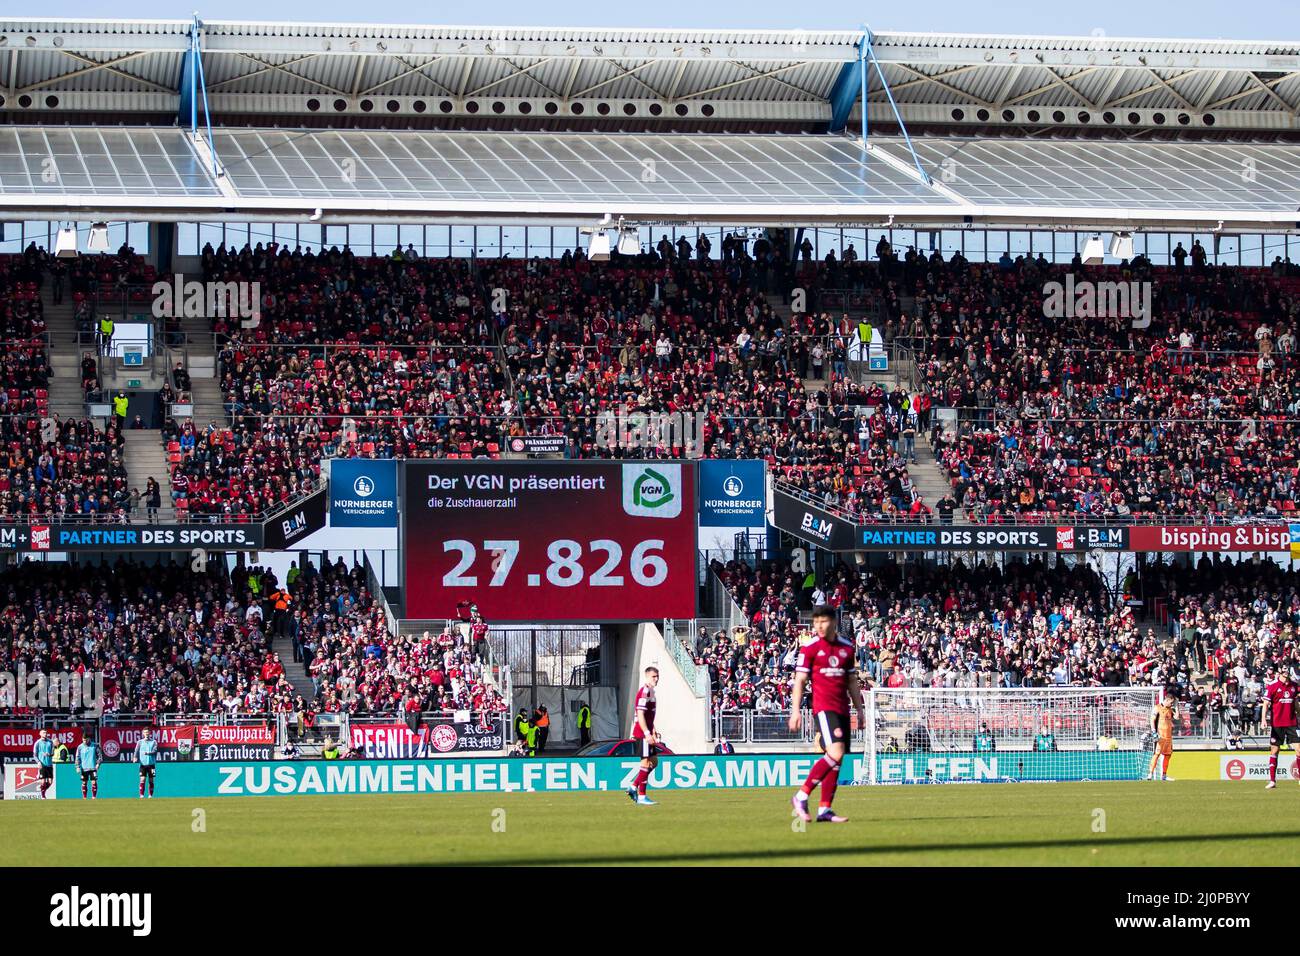 Nuremberg, Germany. 20th Mar, 2022. Soccer: 2. Bundesliga, 1. FC Nürnberg - Dynamo Dresden, 27. matchday, Max-Morlock-Stadion. Overview of Max Morlock Stadium during the match with spectators. The scoreboard shows the number of spectators 27,826 Credit: Tom Weller/dpa - IMPORTANT NOTE: In accordance with the requirements of the DFL Deutsche Fußball Liga and the DFB Deutscher Fußball-Bund, it is prohibited to use or have used photographs taken in the stadium and/or of the match in the form of sequence pictures and/or video-like photo series./dpa/Alamy Live News Stock Photo